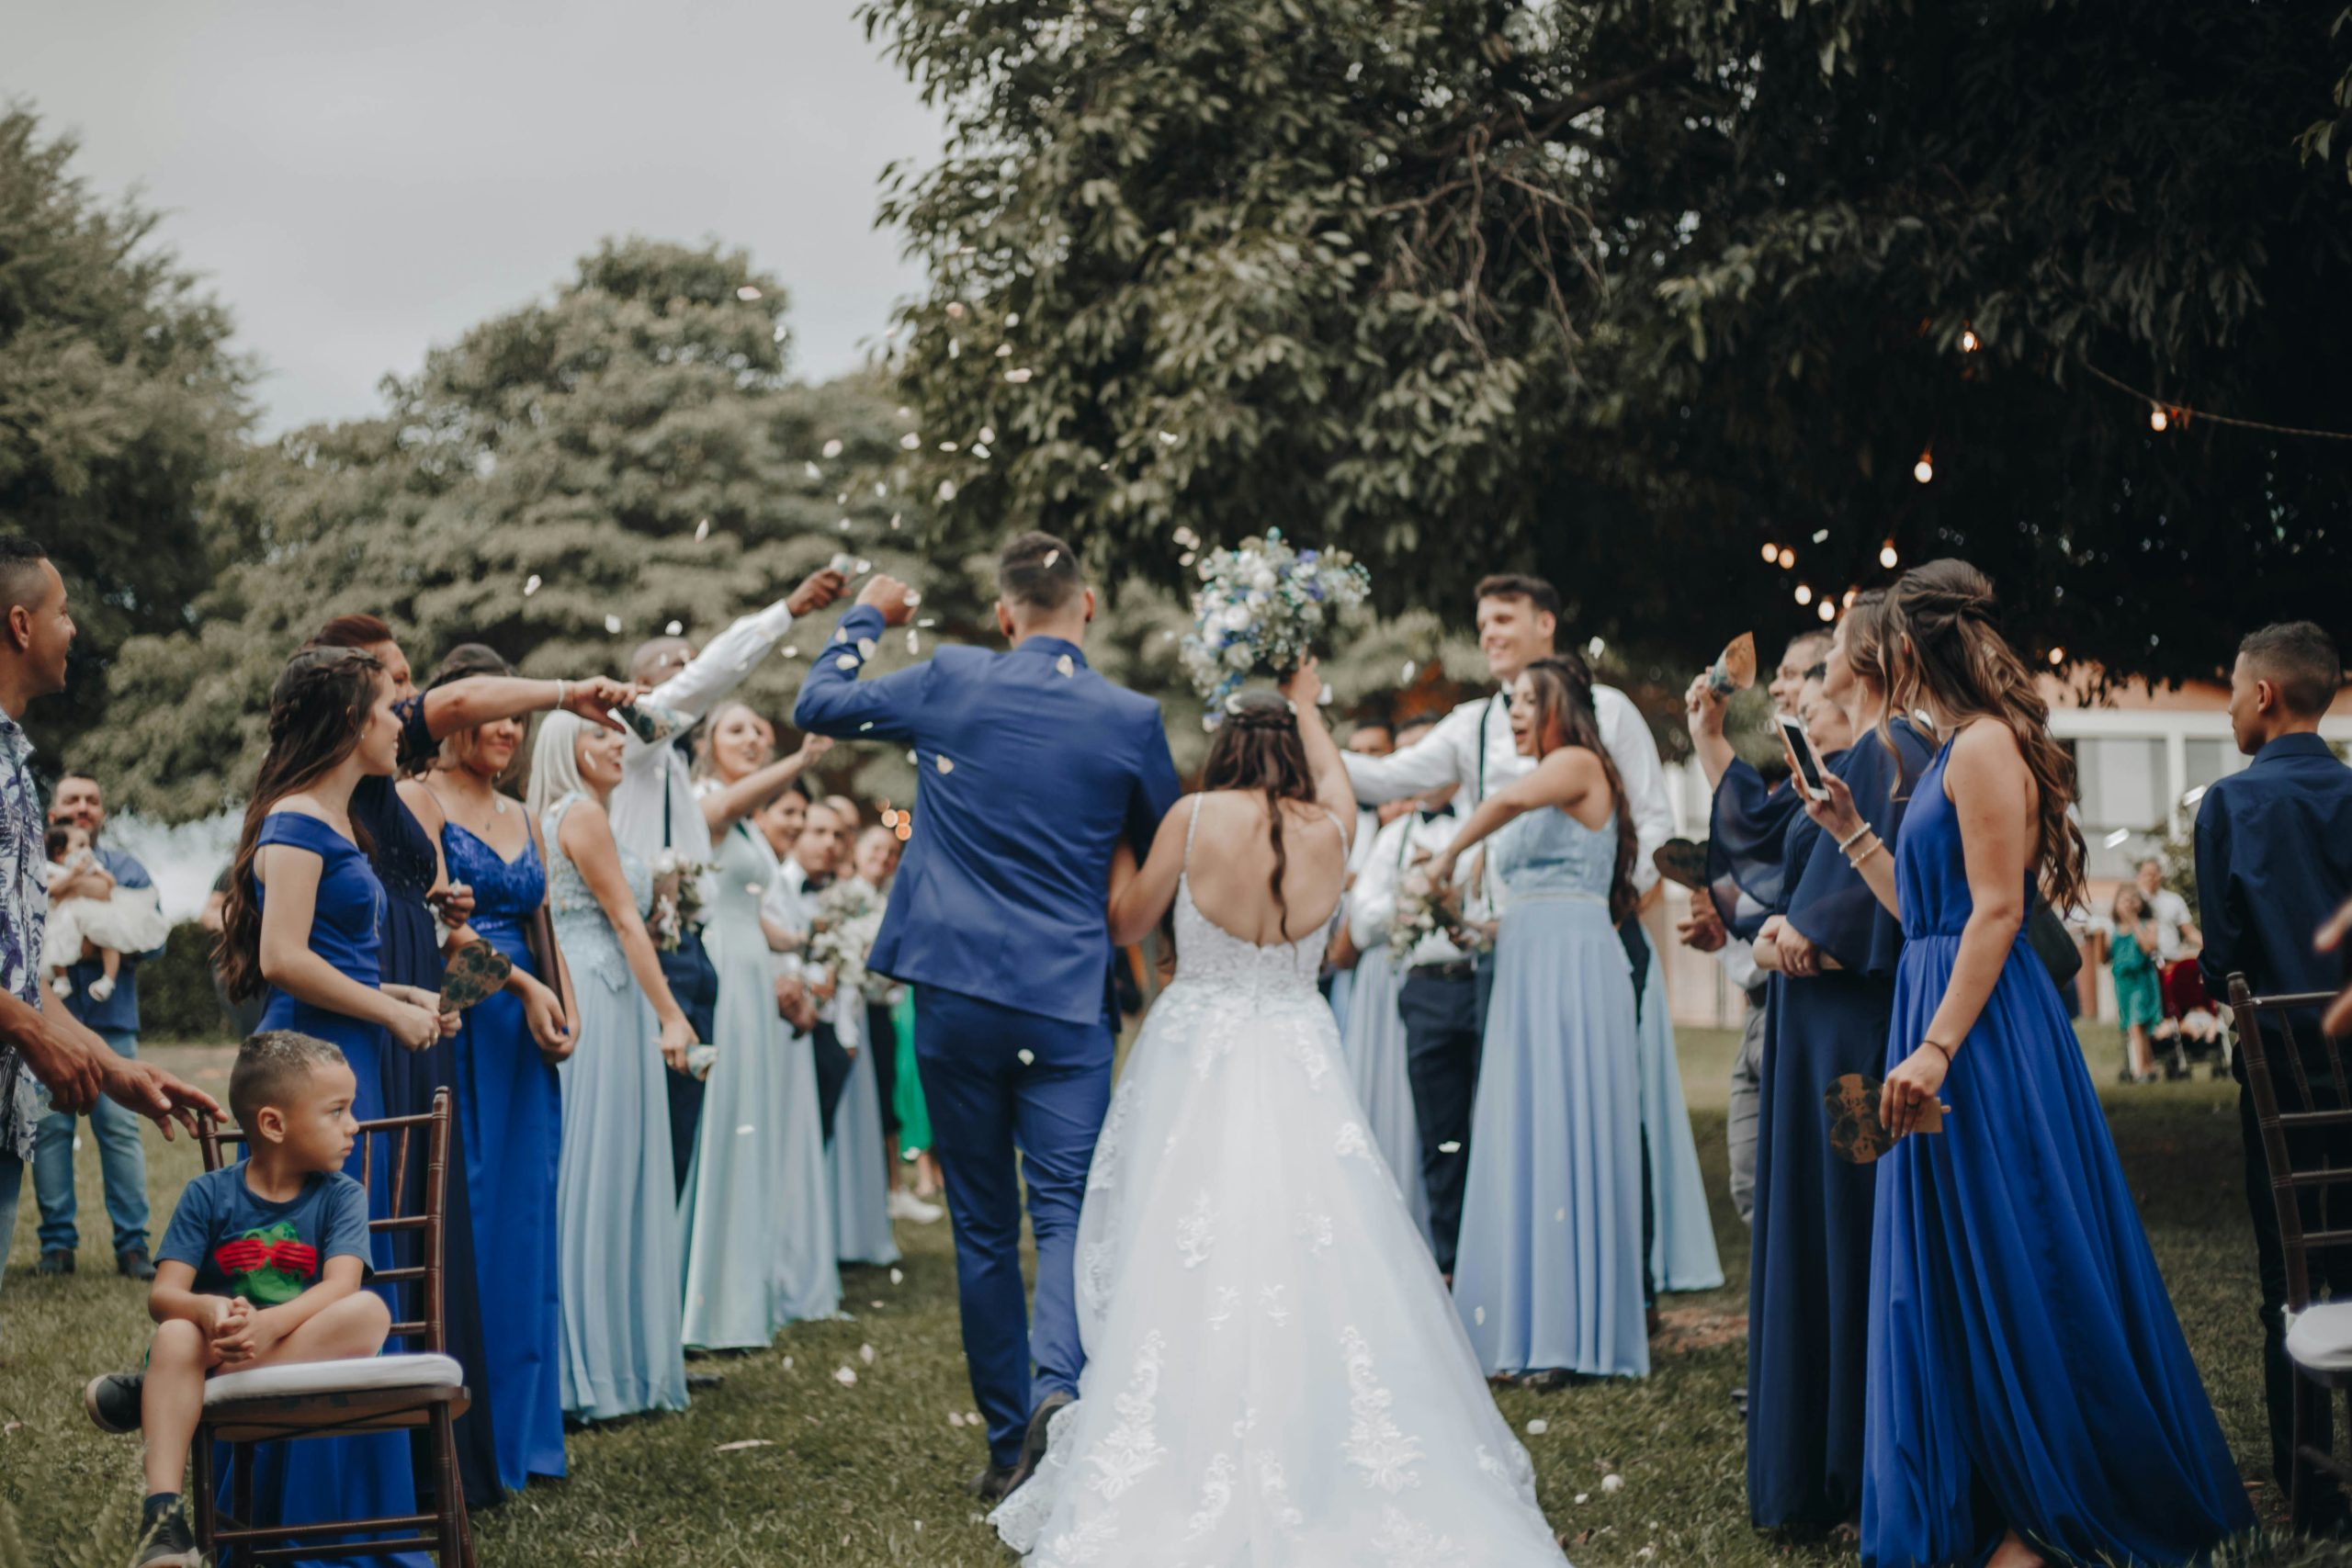 find everything you need for your dream wedding with our comprehensive wedding planning services, from venue selection to flowers and catering.